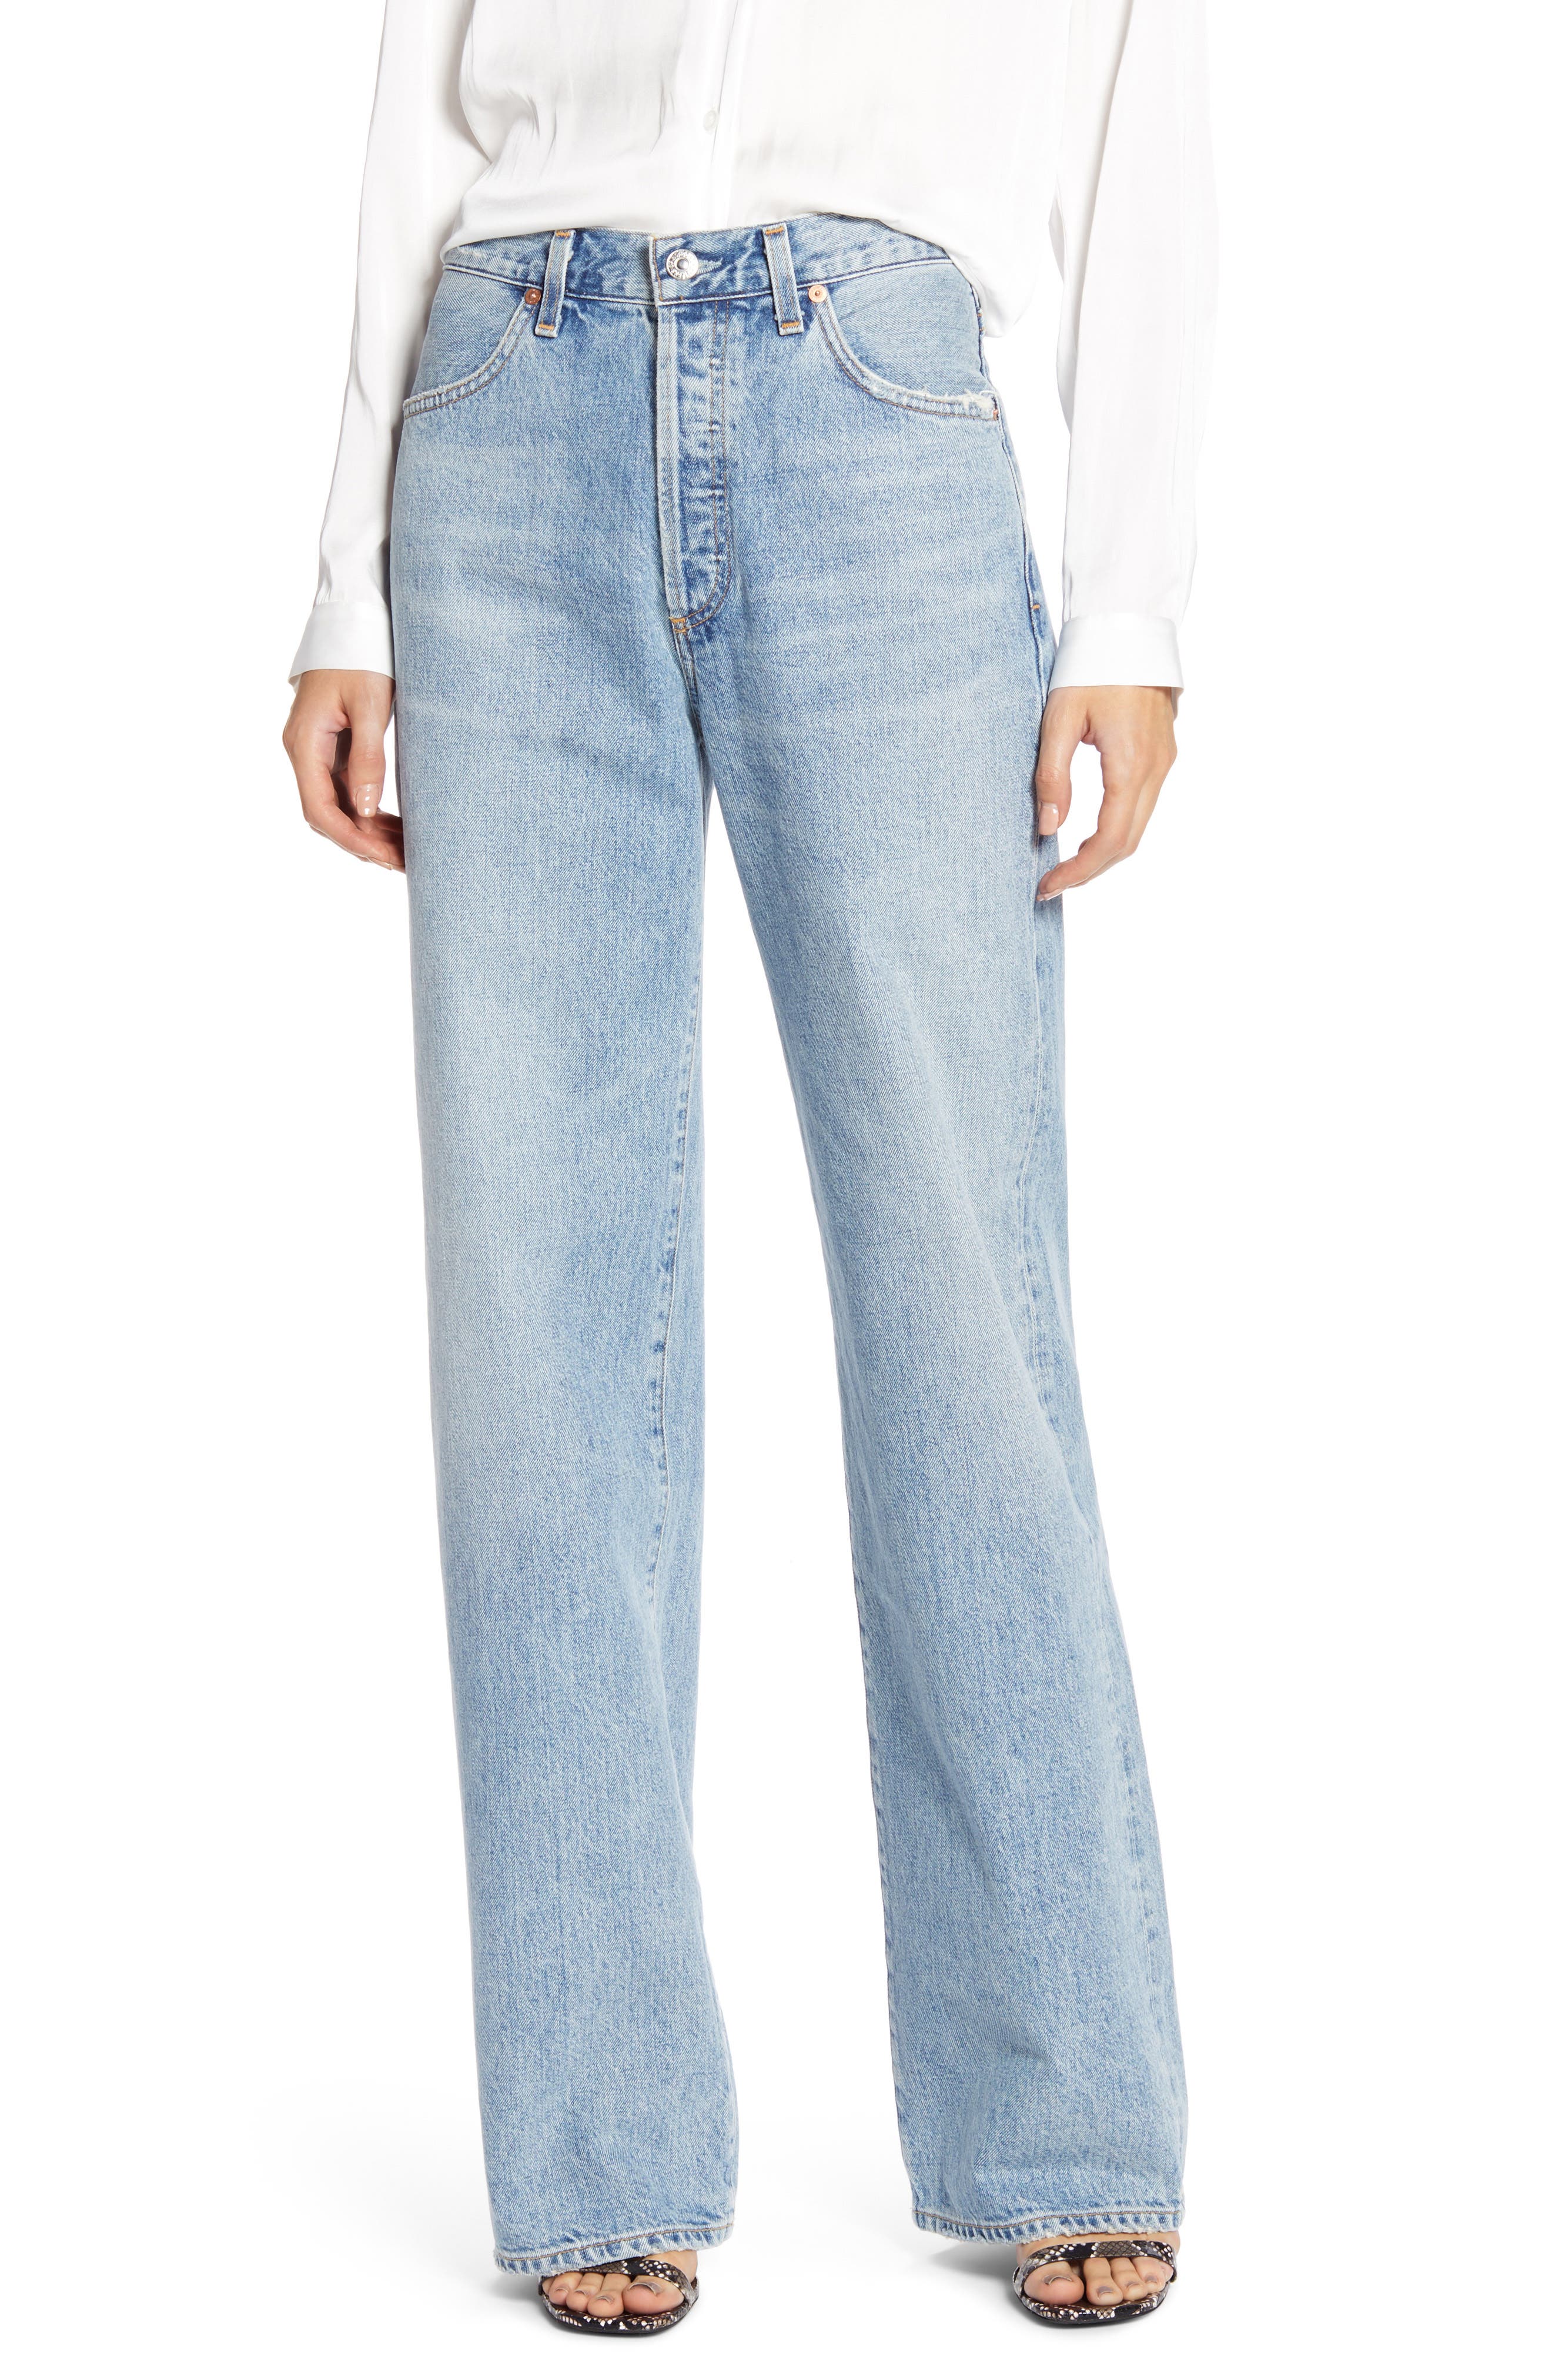 citizens for humanity jeans nordstrom